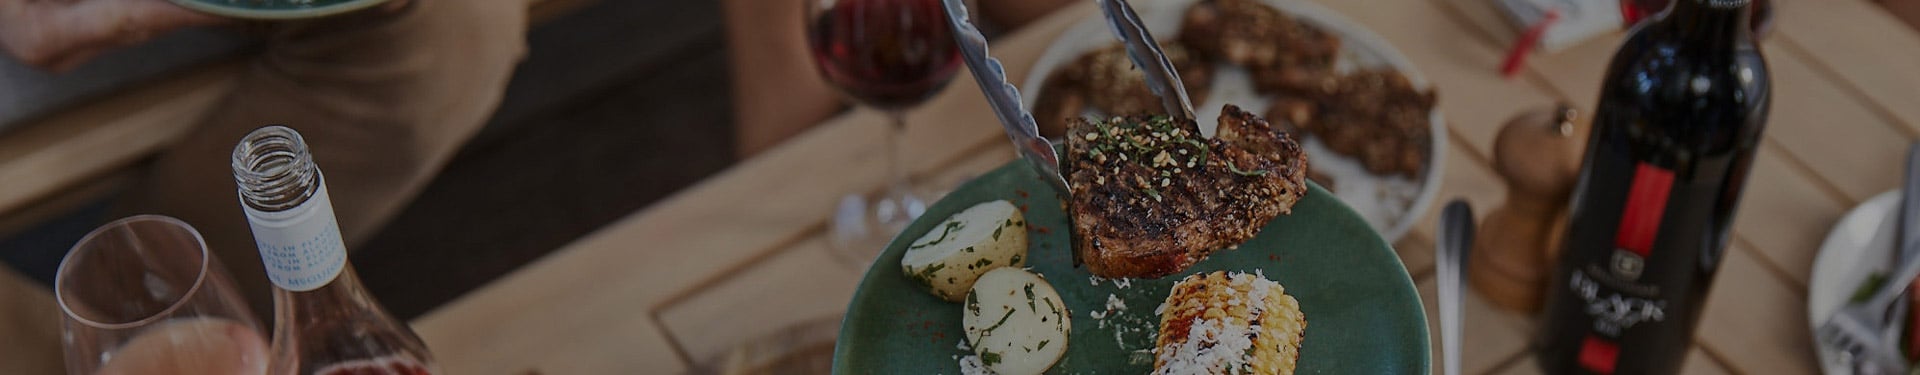 Easy Lamb BBQ recipe with Red Wine Pairing